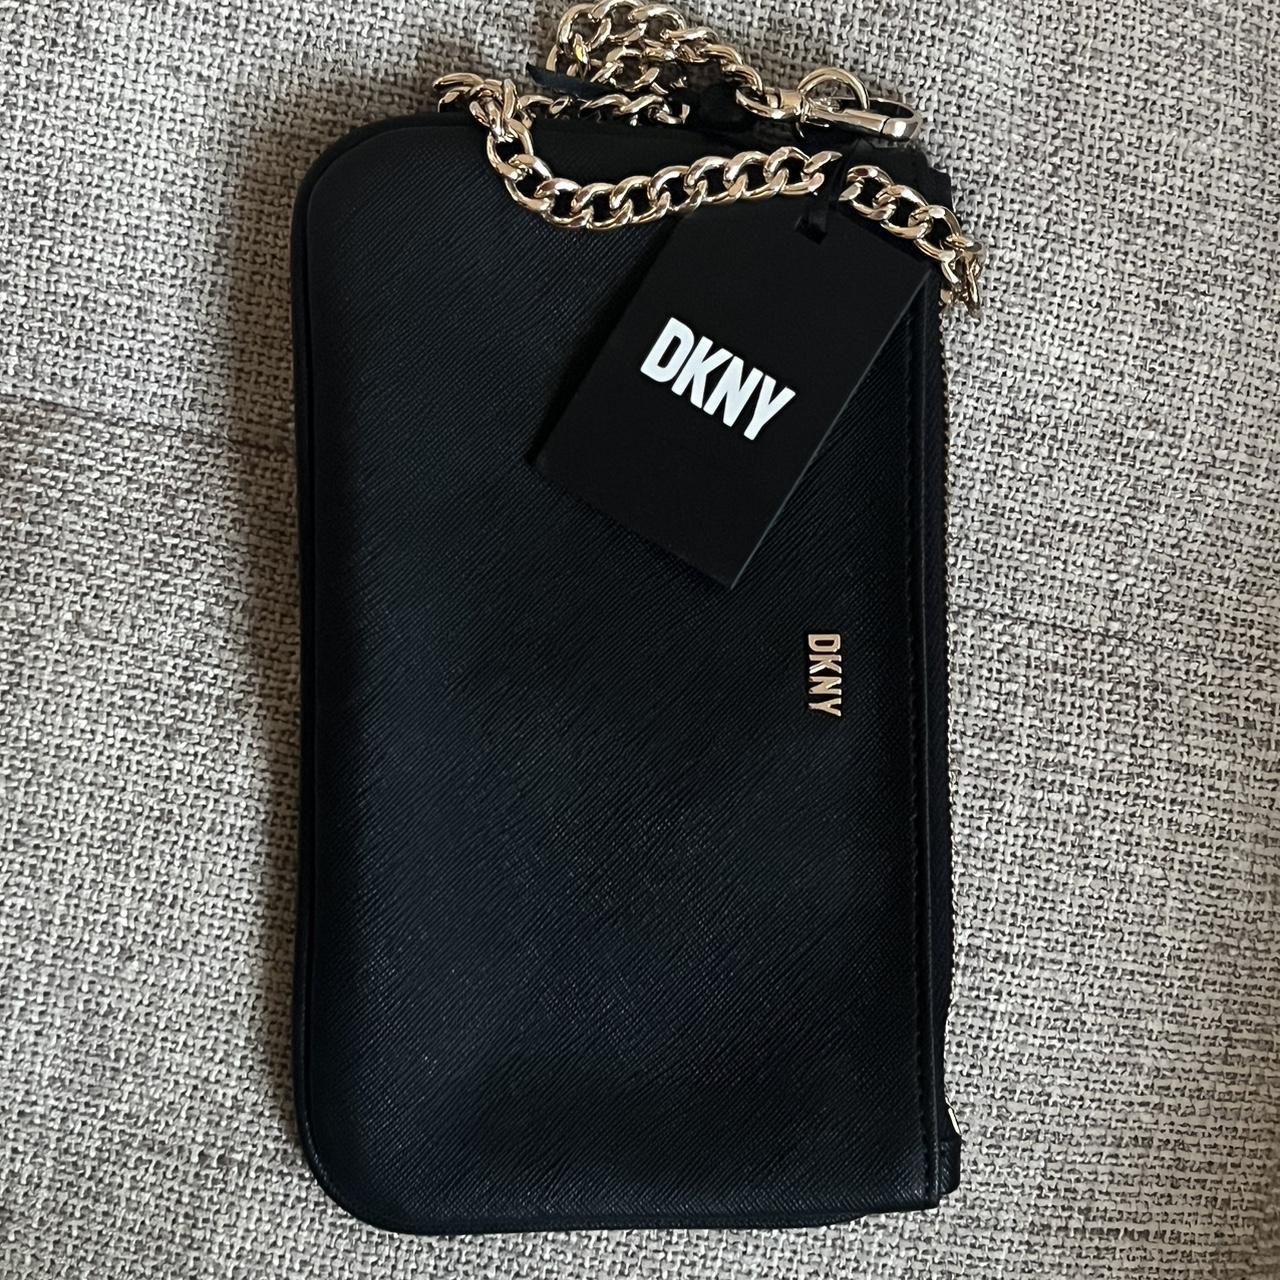 DKNY Black Velvet Small Shoulder Purse Bag Y2K Style with attached small  pouch - $15 - From Emily